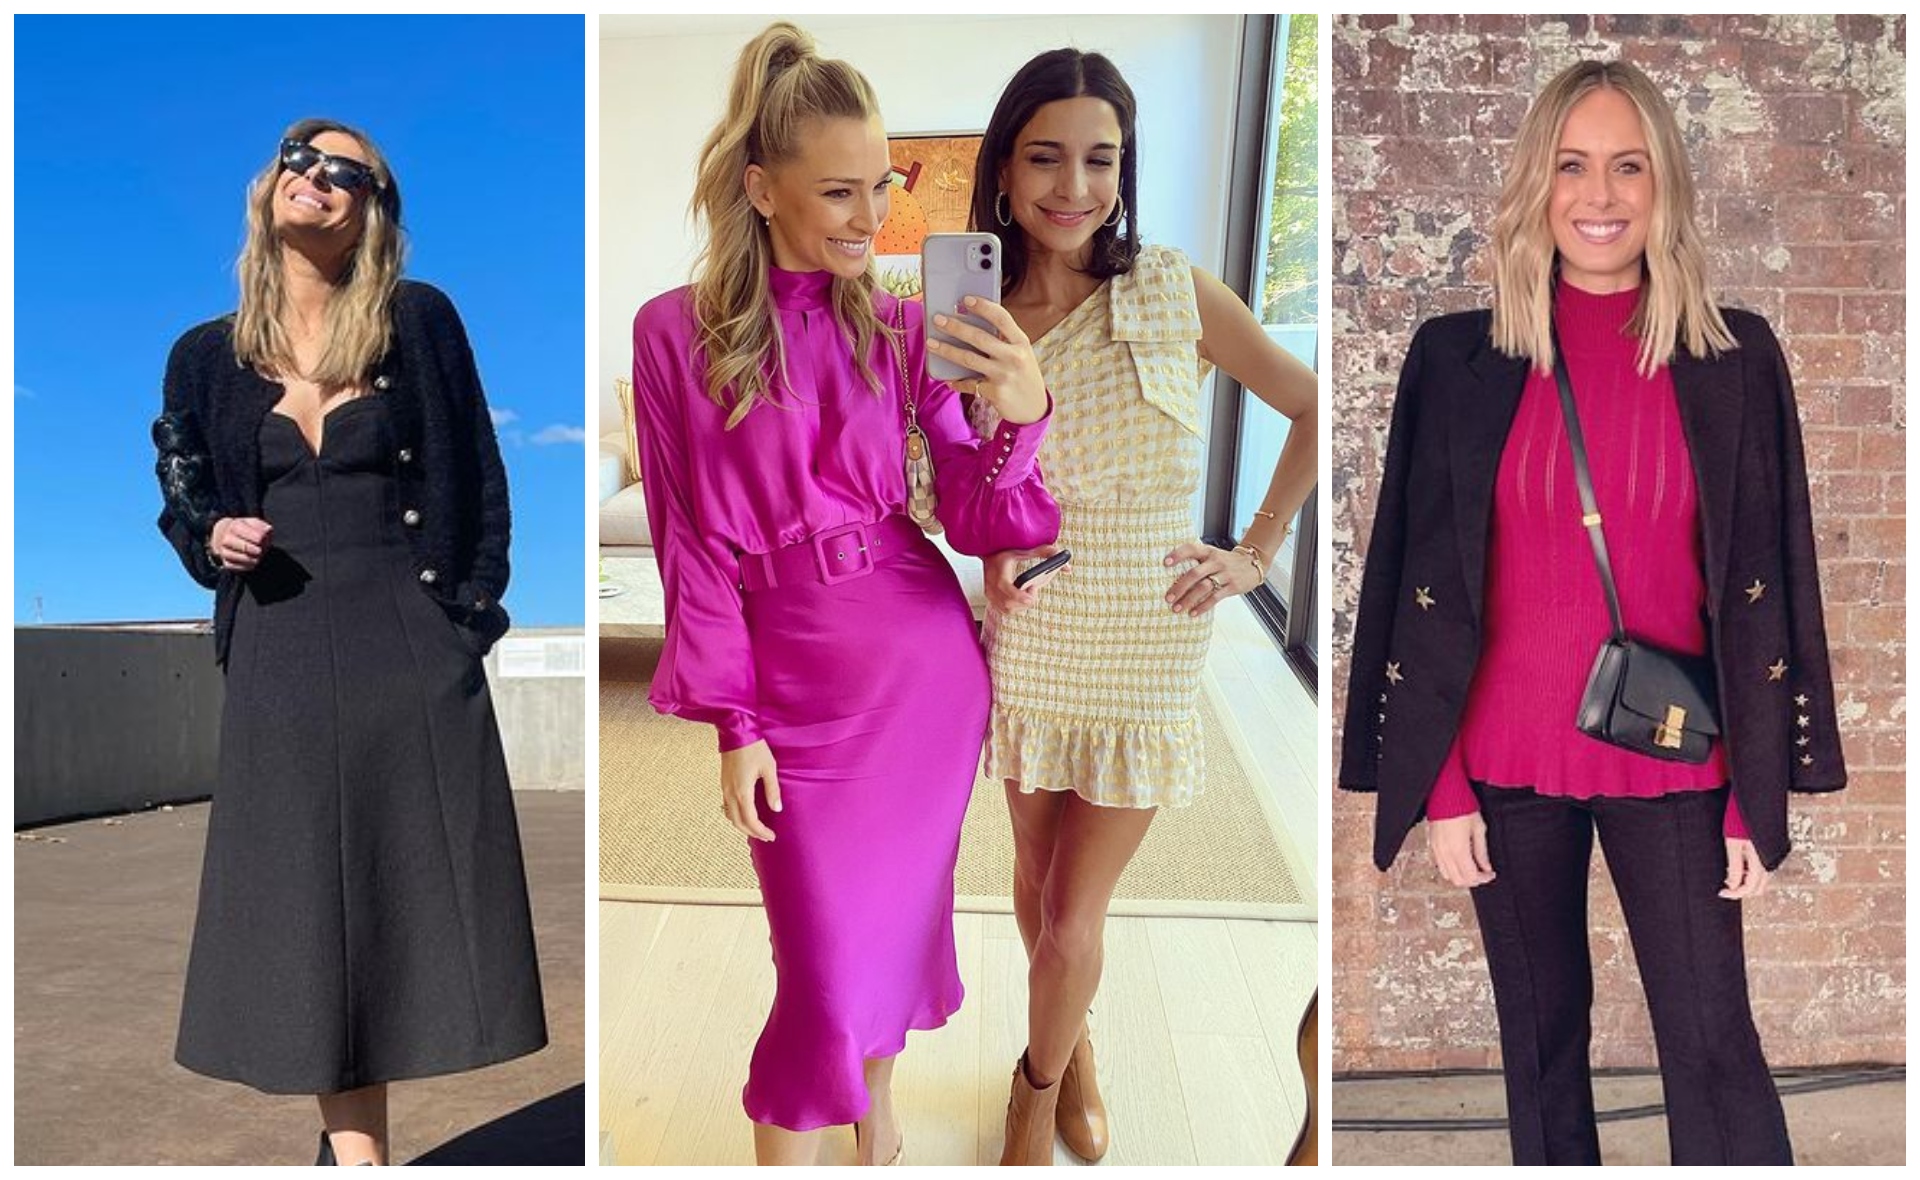 There’s local lovin’ aplenty as Australian celebrities get all dressed up for Fashion Week